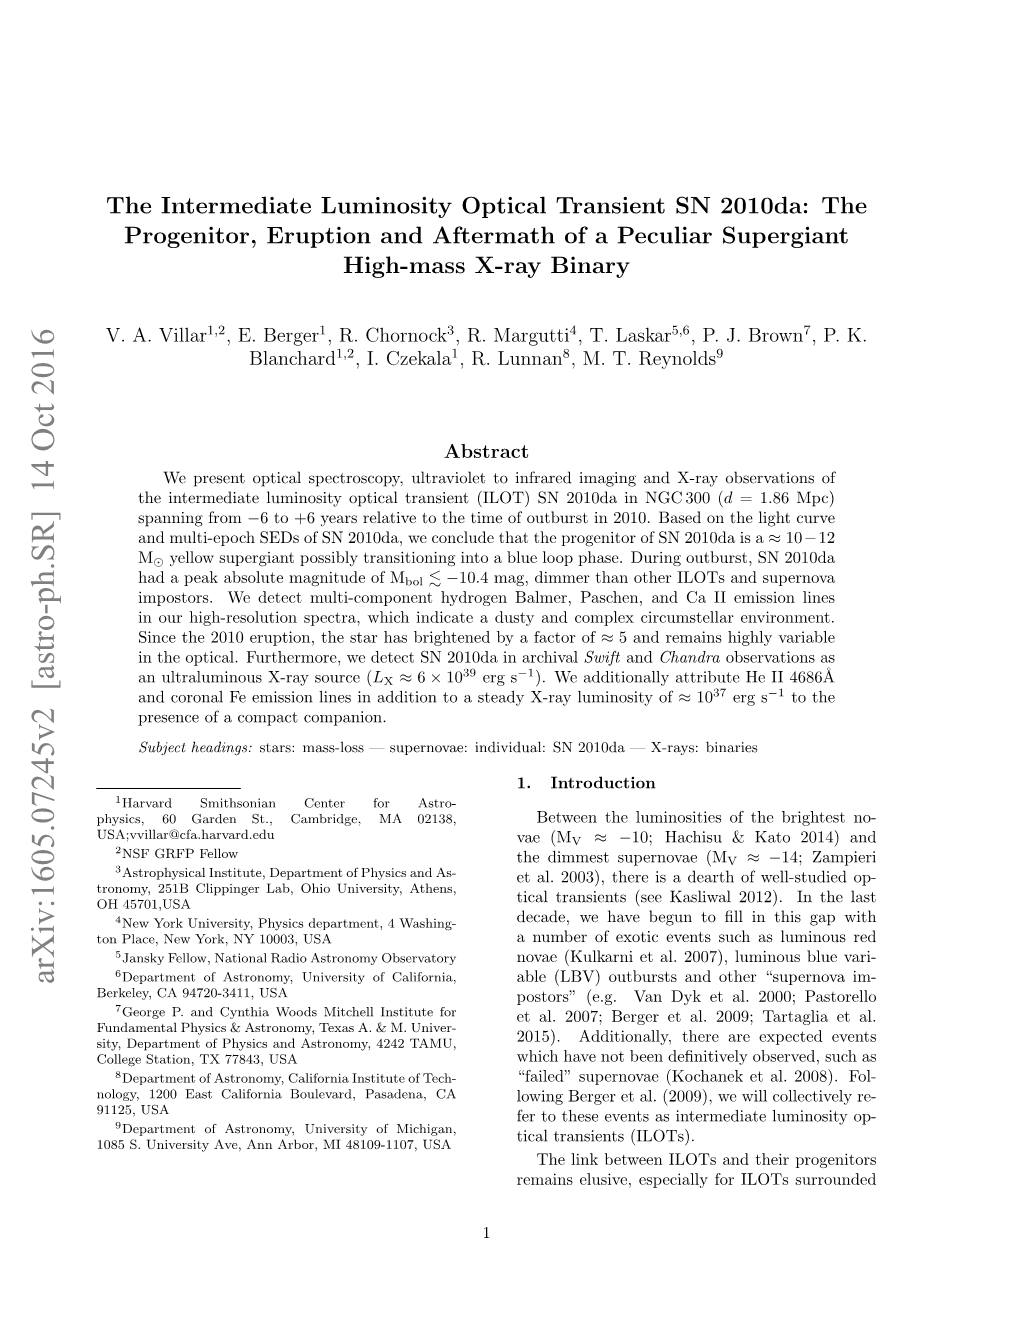 The Intermediate Luminosity Optical Transient SN 2010Da: the Progenitor, Eruption and Aftermath of a Peculiar Supergiant High-Mass X-Ray Binary